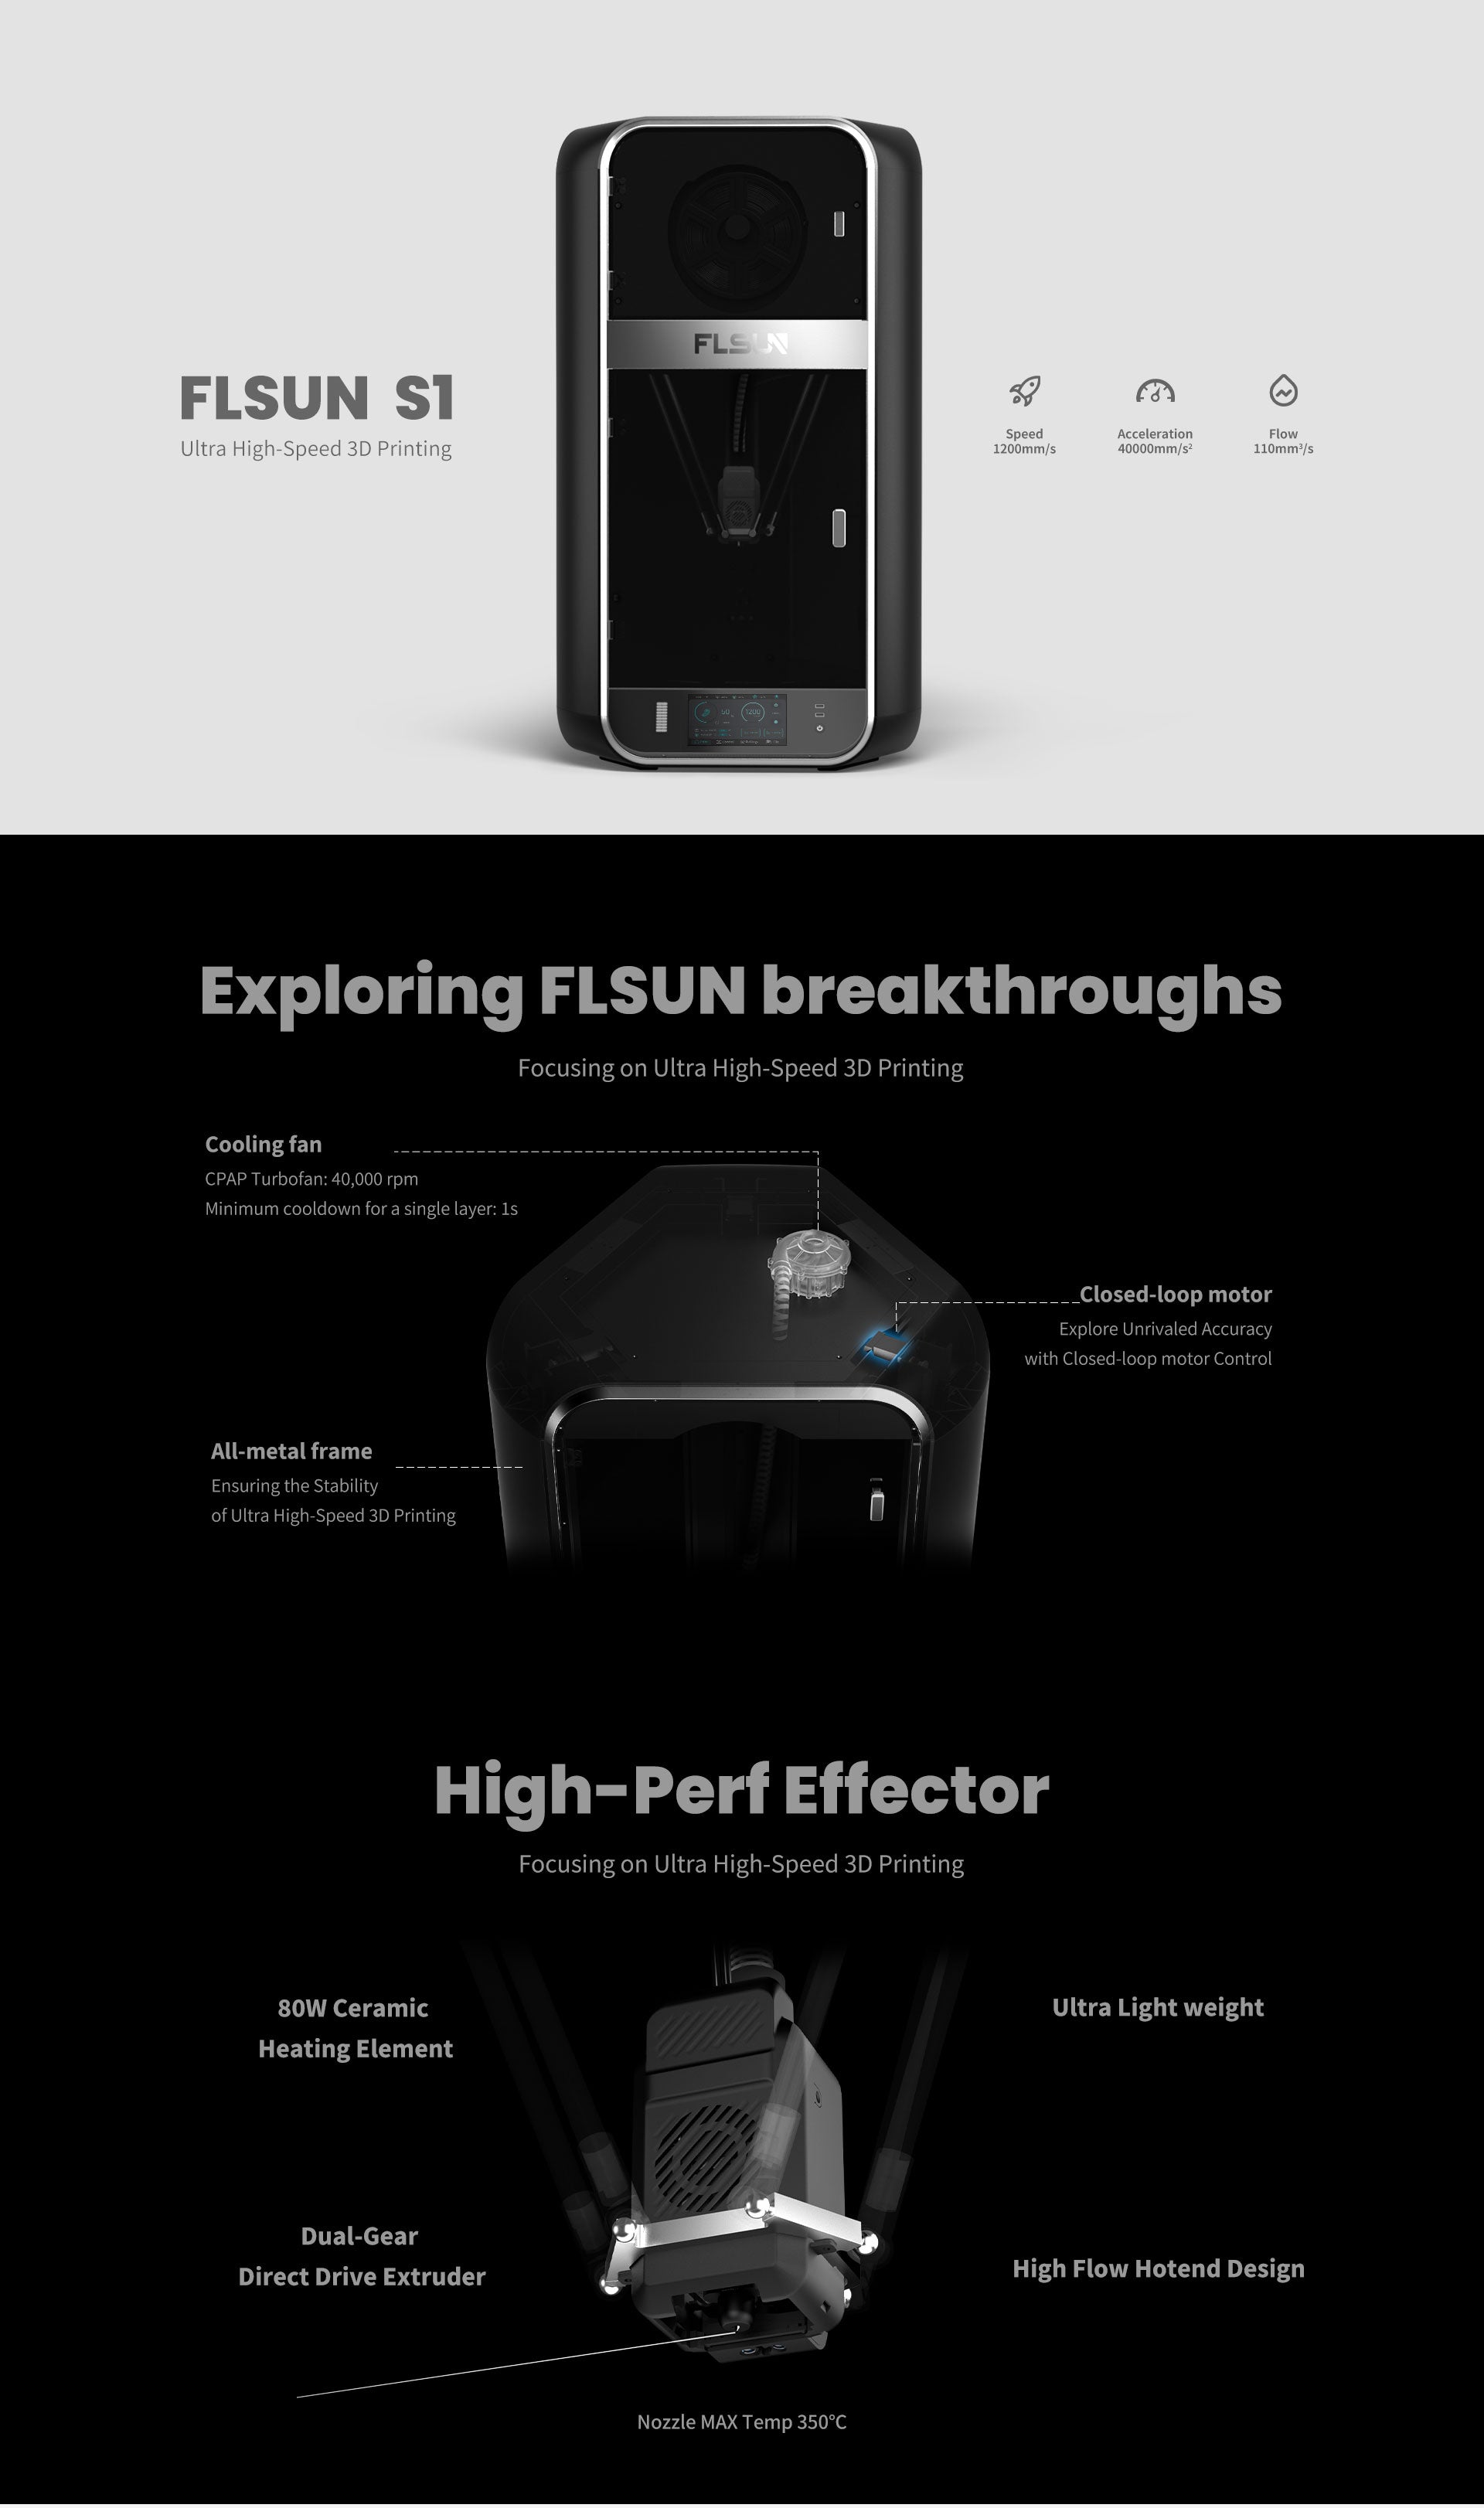 Flsun S1: New delta 3D printer prints particularly fast and